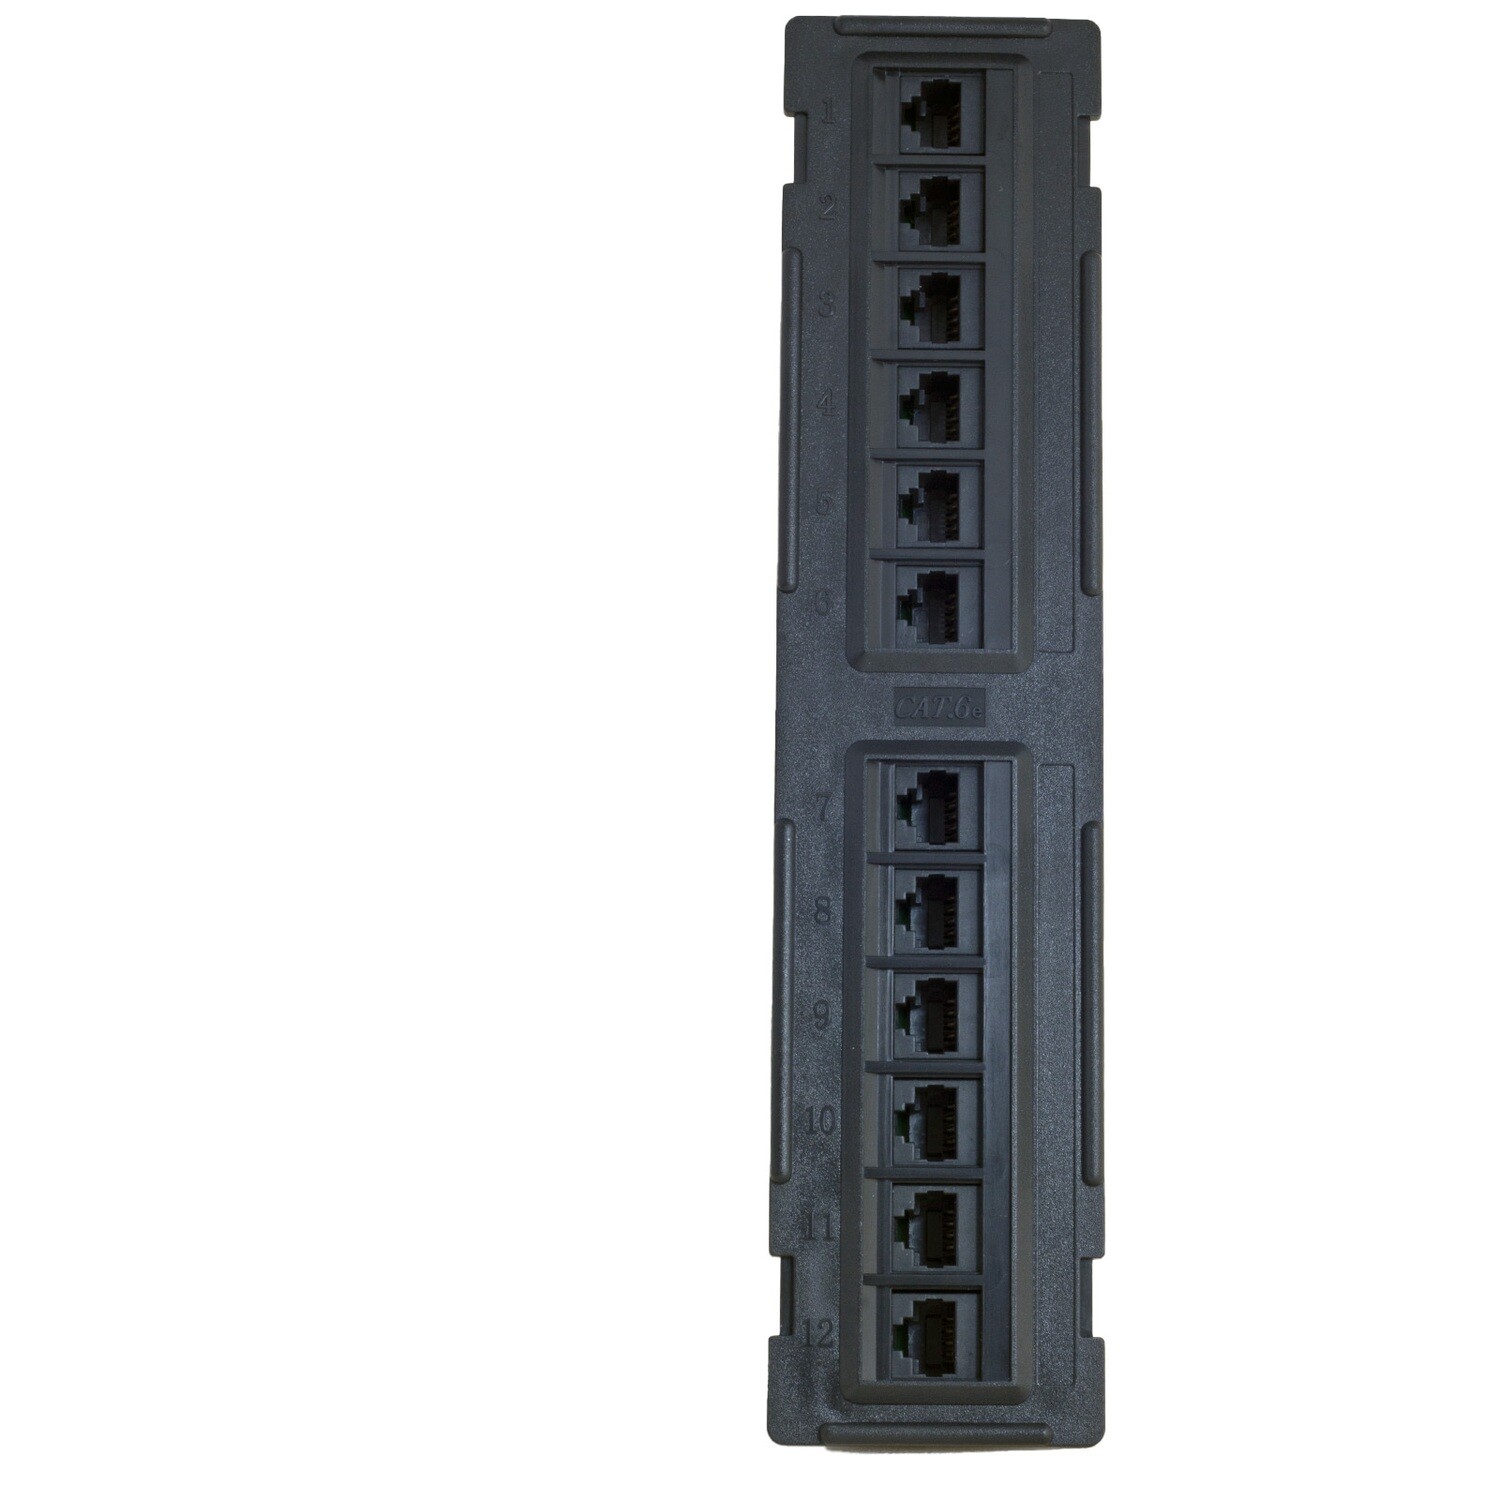 12 Port Cat-6 Patch Panel 10" with Standoff as Low as $14.00